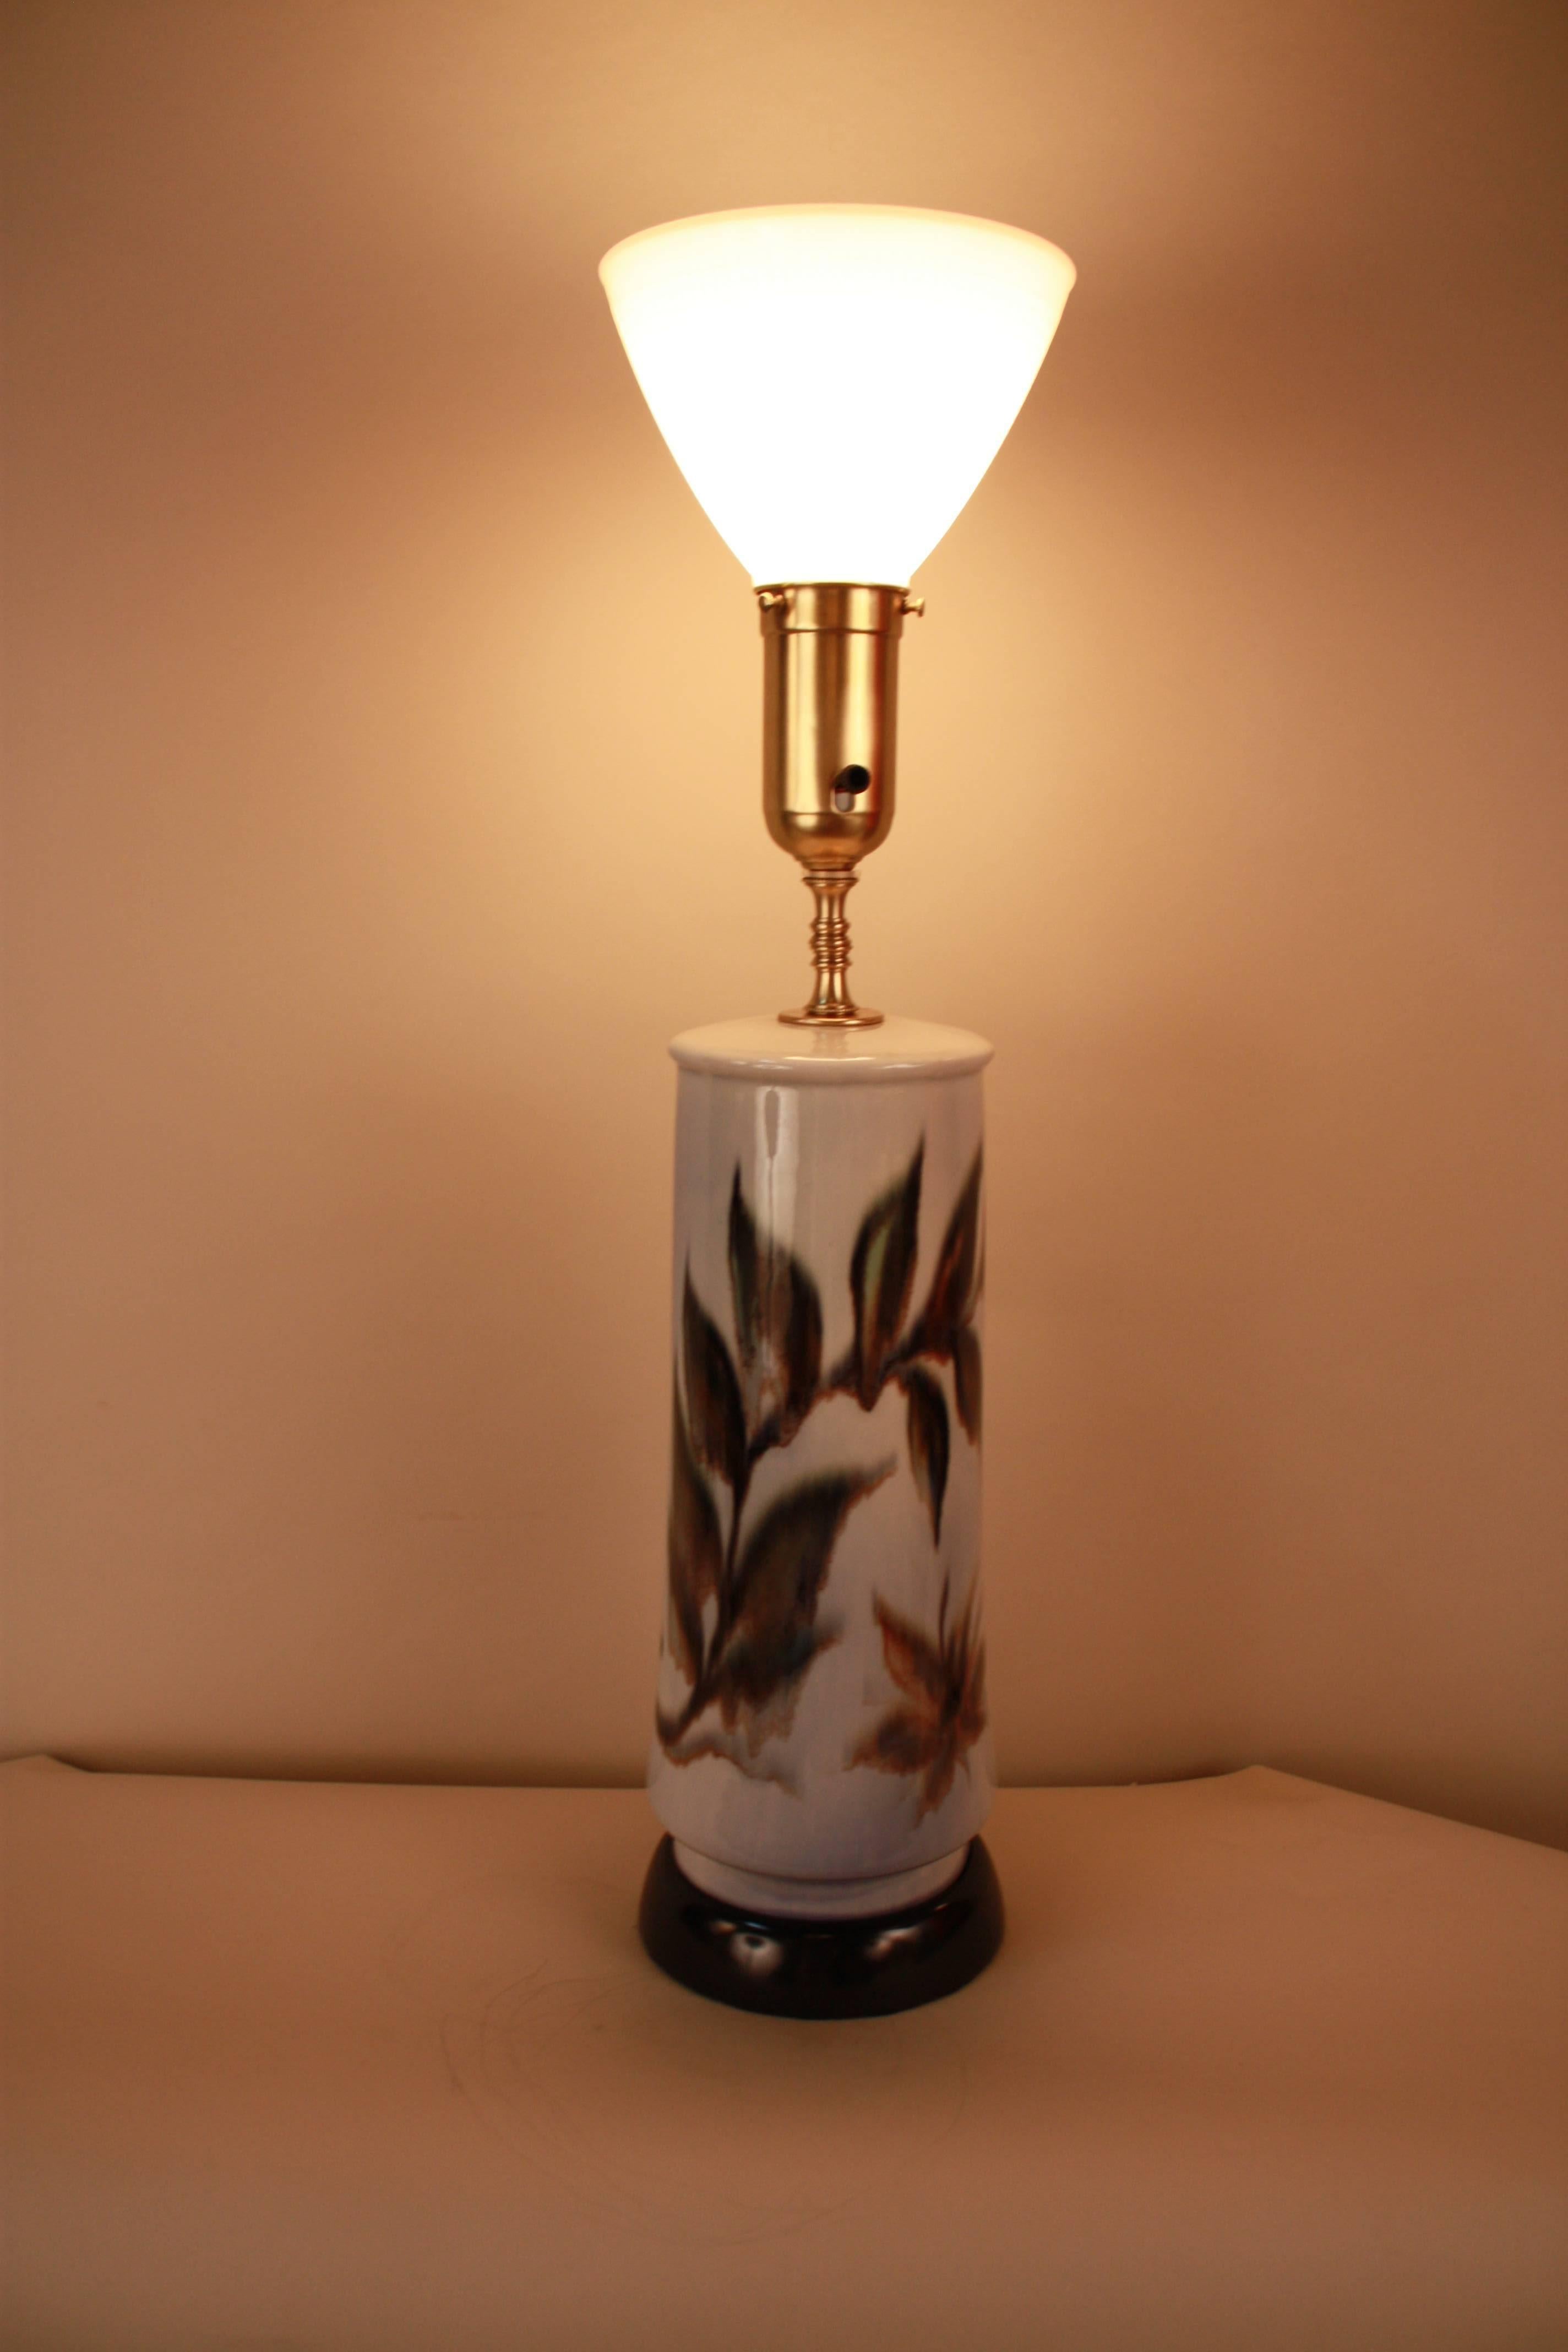 Elegant 1950s painted pottery table lamp with wooden lacquer base.
Fitted with silk lampshade.
We have almost the same ref. LU91368746133.